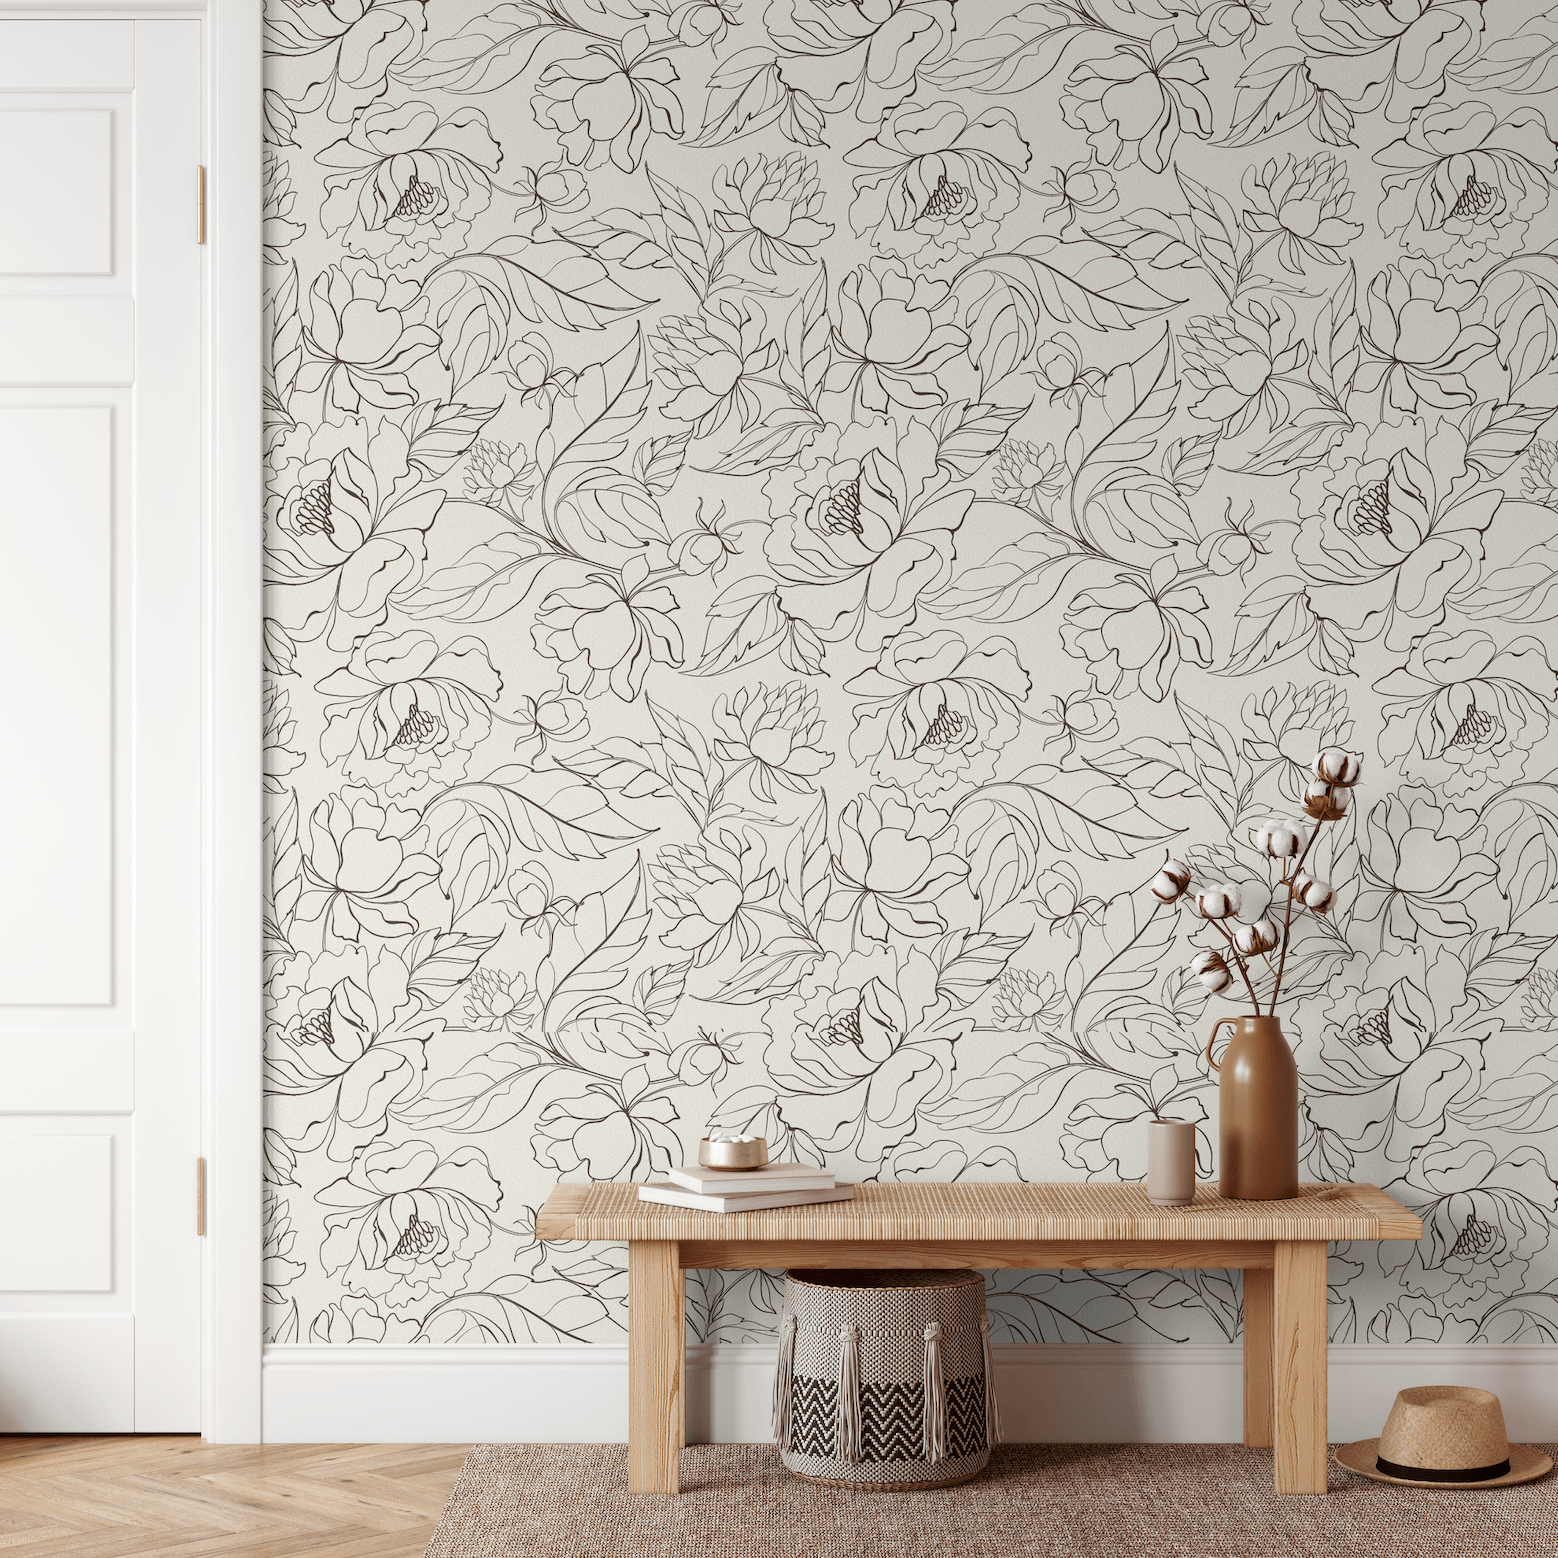 Olive Floral Wallpaper, Adhesive Wallpaper, Wallpaper Peel And Stick, Removable Wallpaper, Wall Paper Peel And Stick